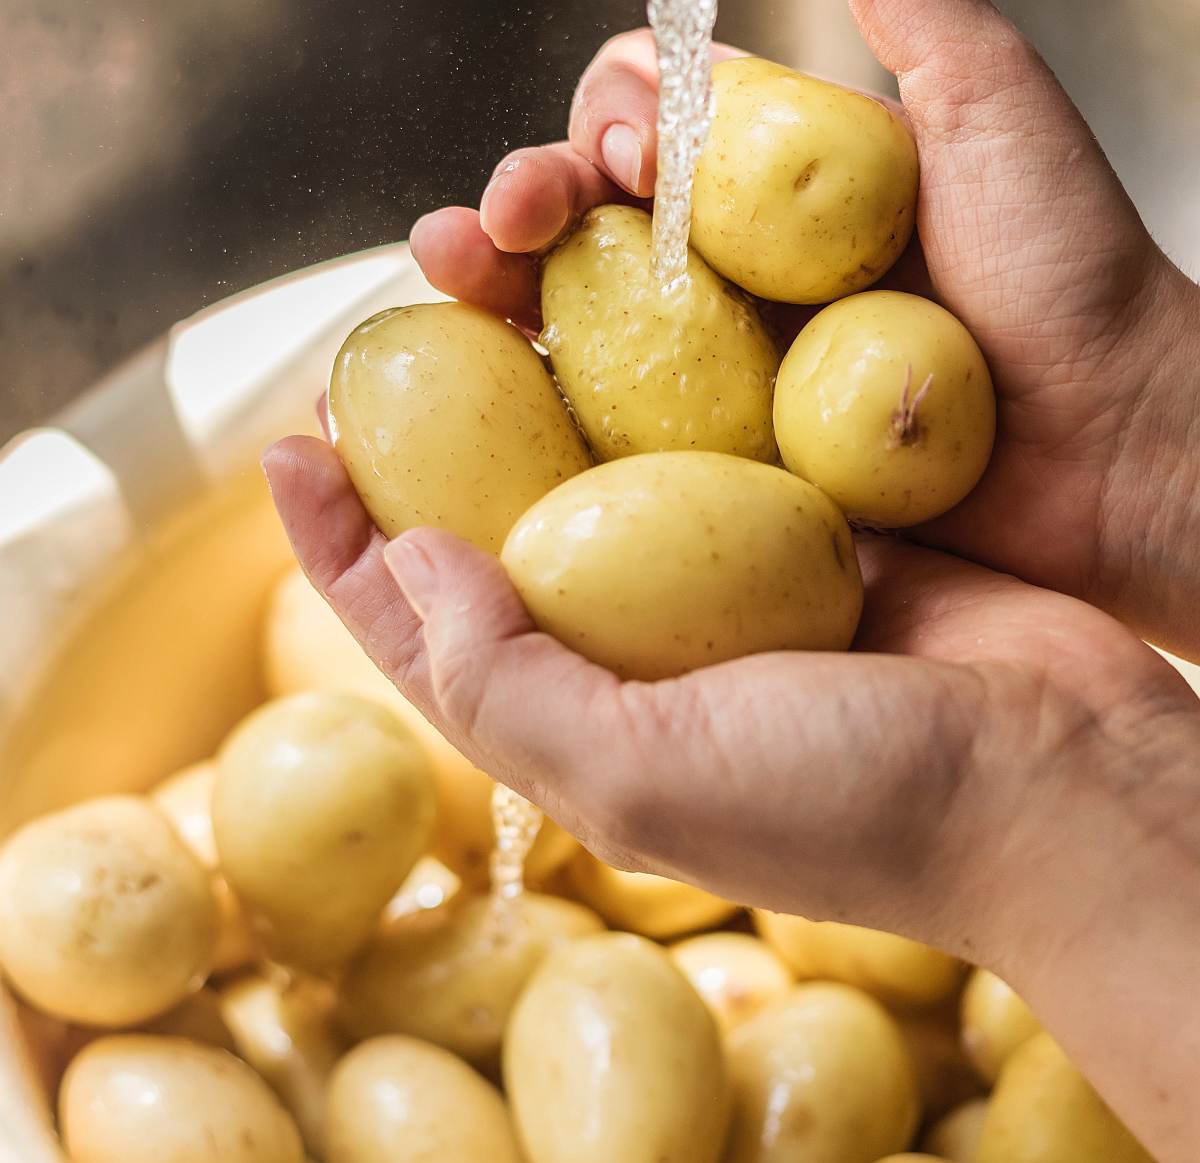 Washing potatoes | Why Should You Wash Fresh Produce with Alkaline Water?